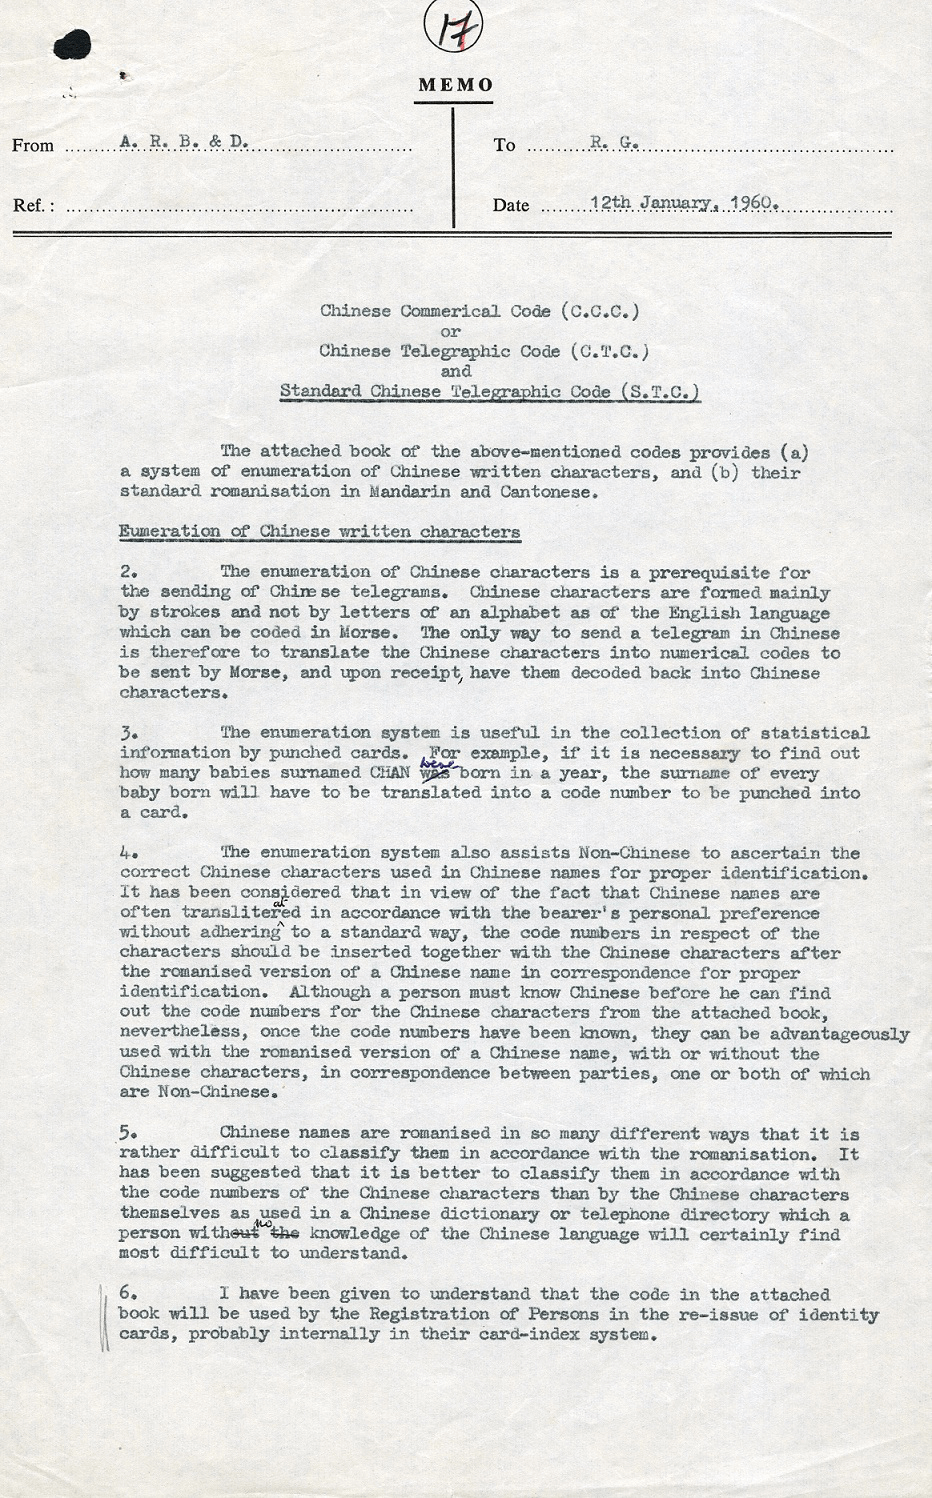 A memo on the use of Chinese Commercial Code in ID cards.  As Chinese characters can be romanised in a number of ways, it is difficult to classify Chinese names by their romanised forms.  Against this background, Chinese Commercial Code was adopted to ensure Chinese names were properly identified and classified. (1960)